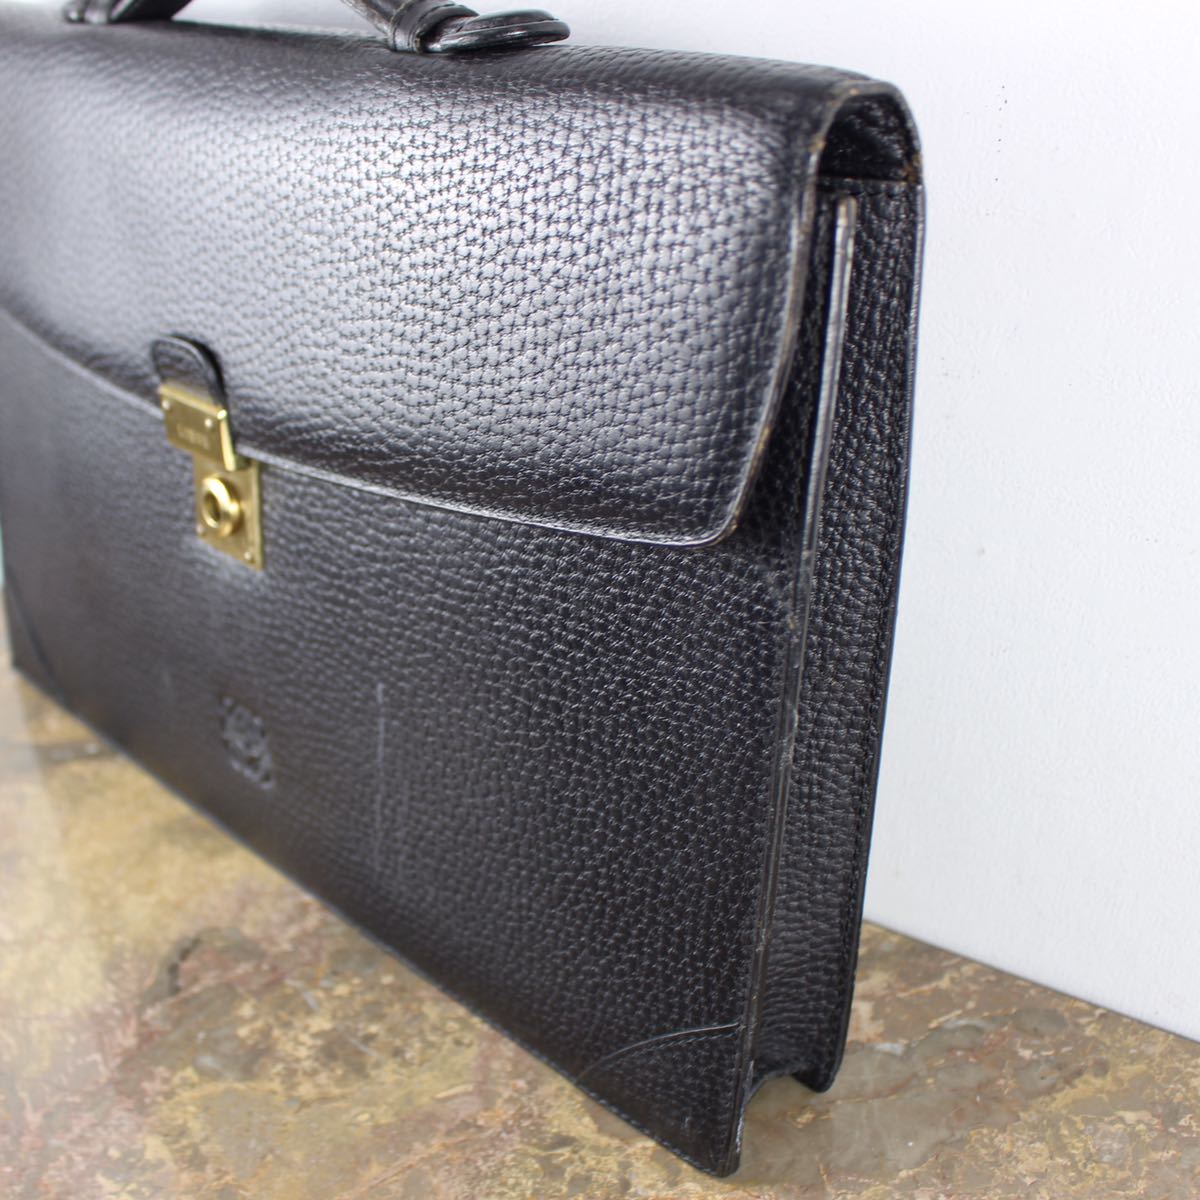 LOEWE ANAGRAM PATTERNED EMBOSSED LEATHER BUSINESS BAG MADE IN ITALY/ロエベアナグラム型押しレザービジネスバッグ